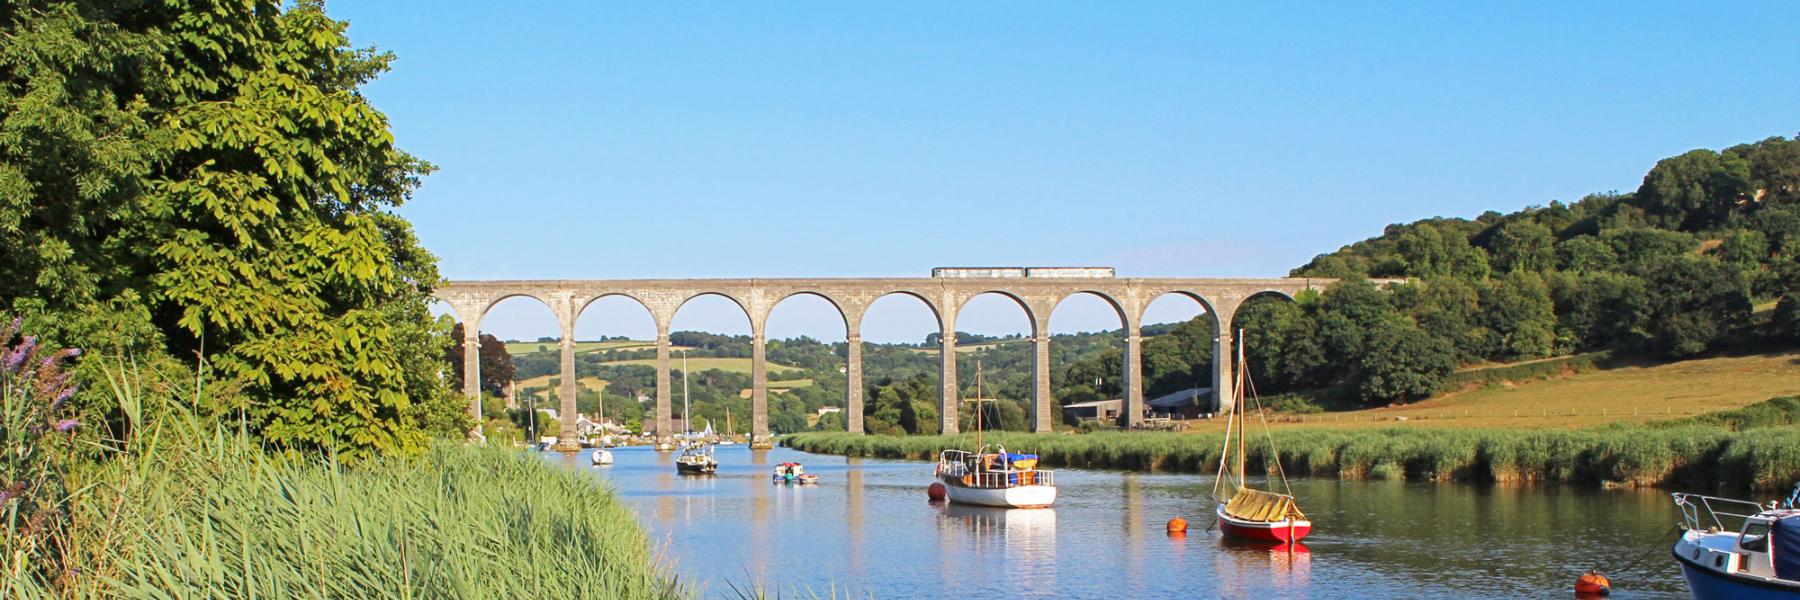 Train on Calstock viaduct on the Tamar Valley Line